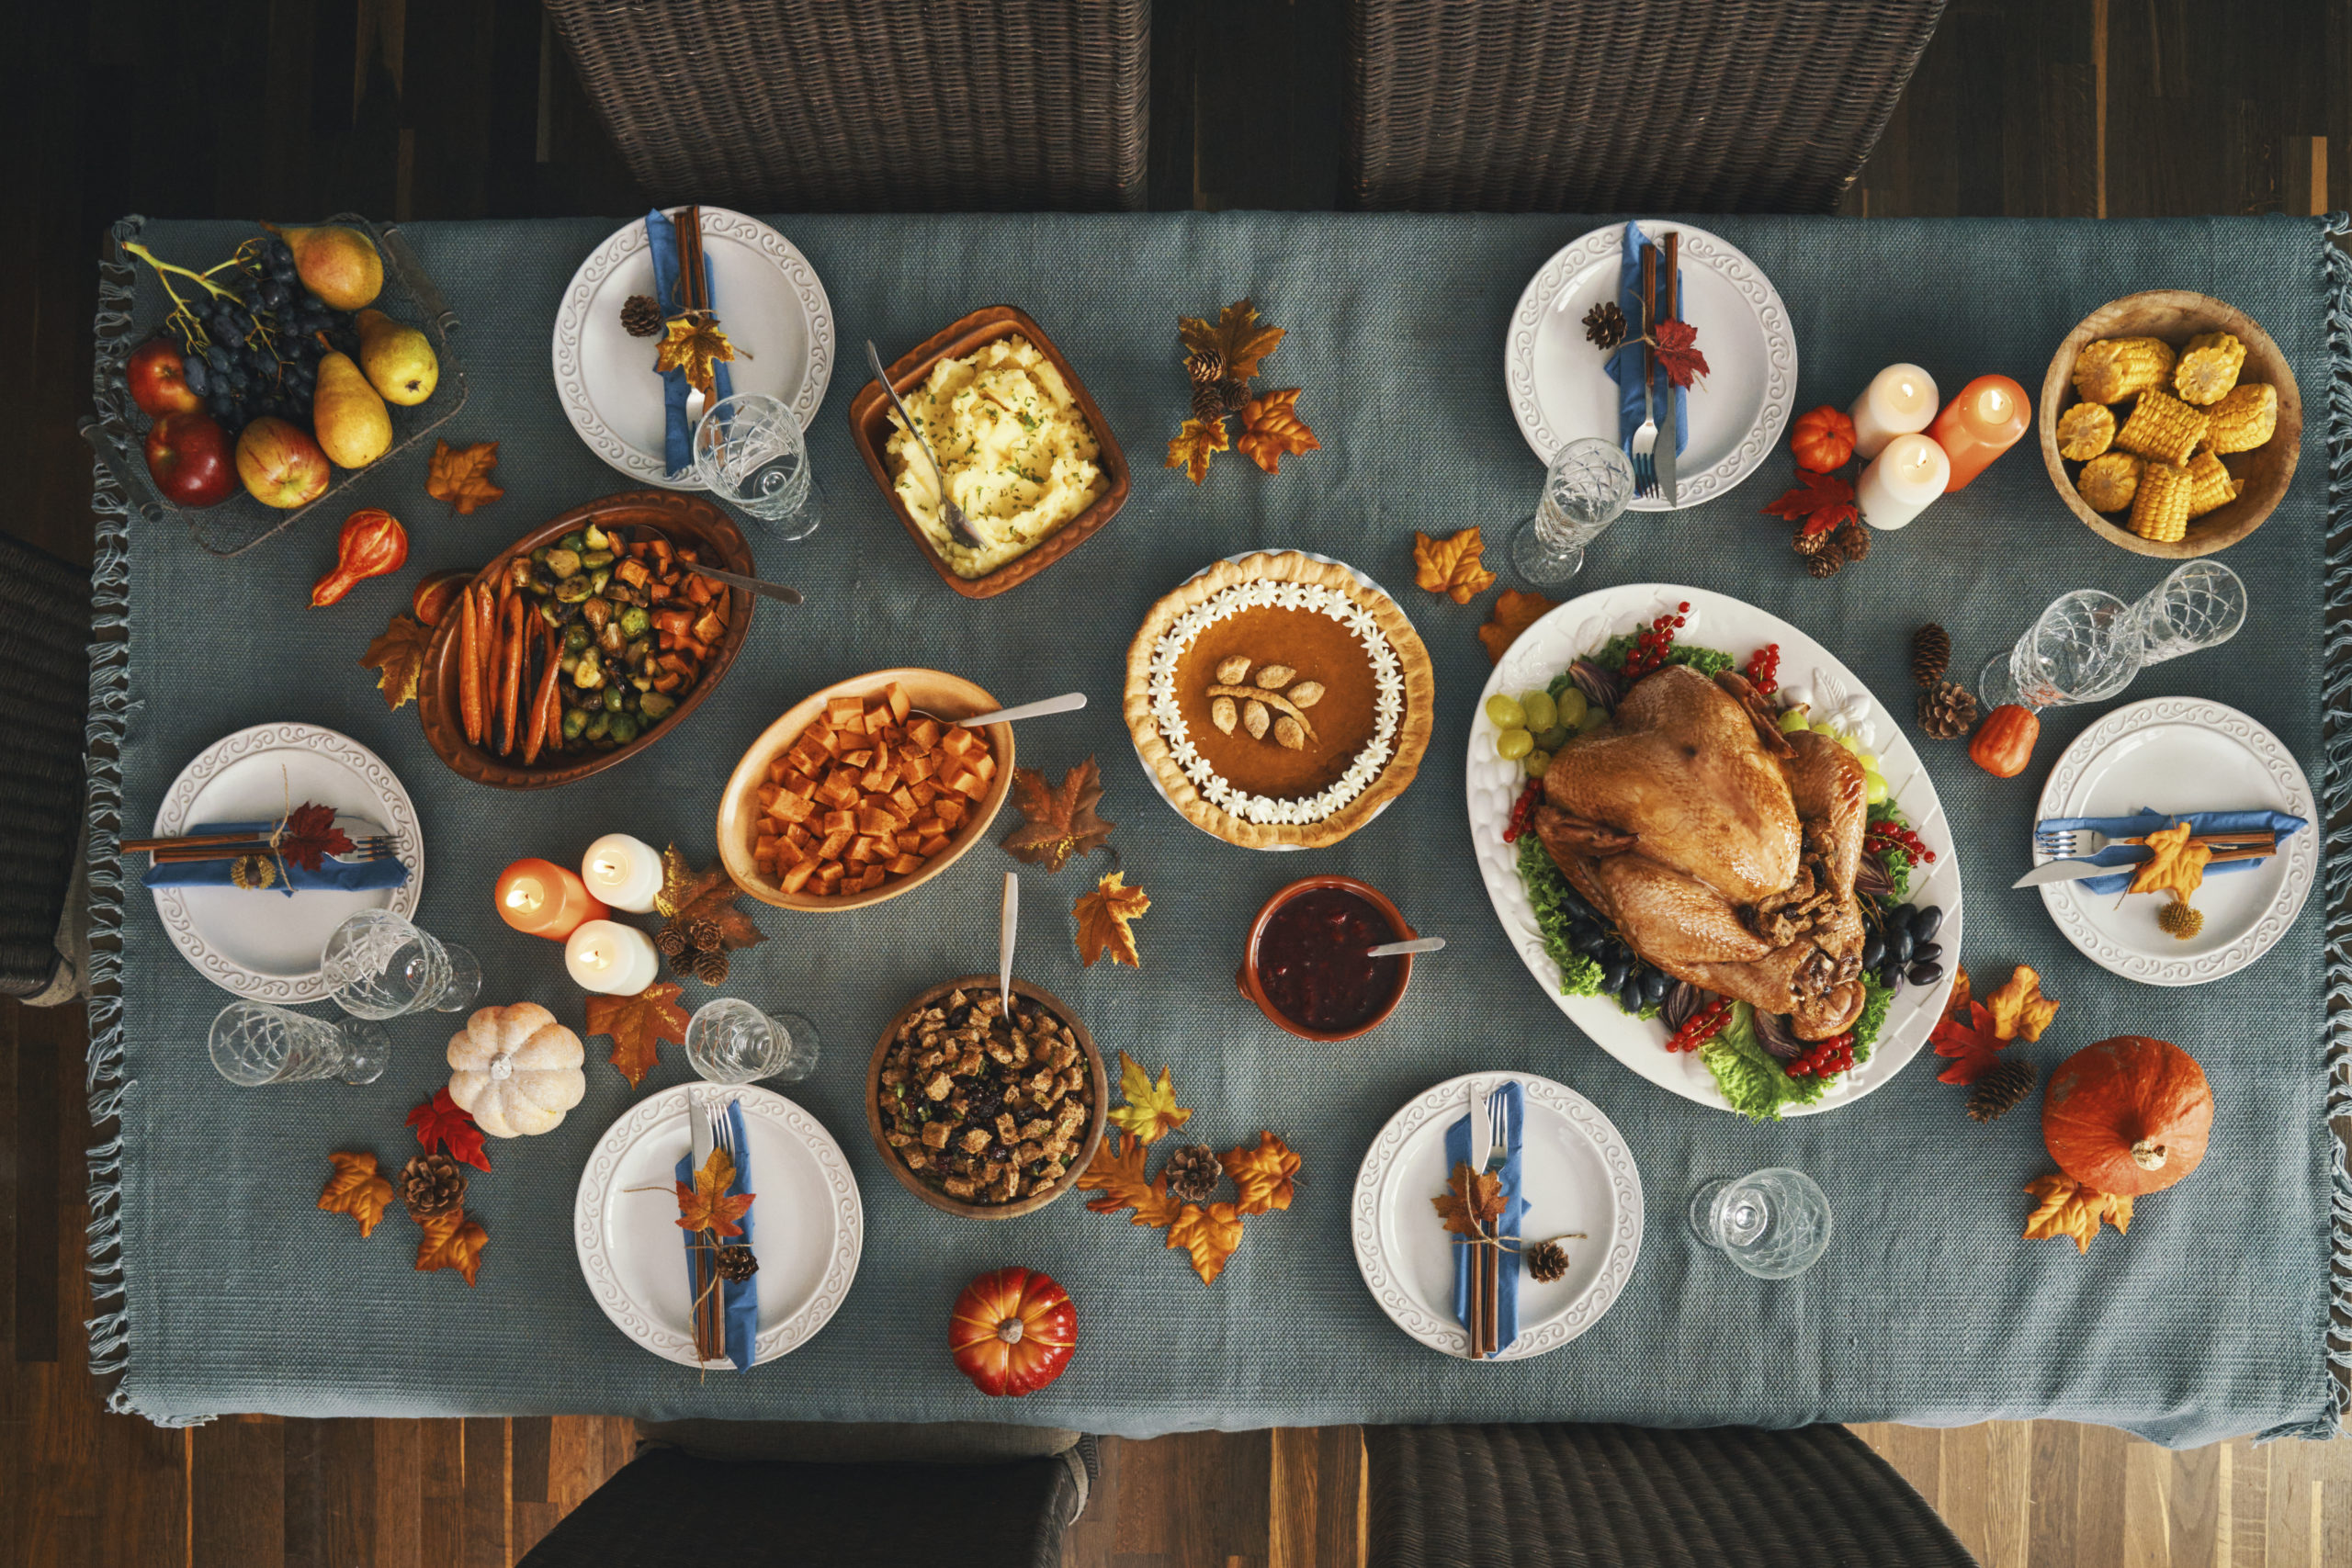 Enjoy Thanksgiving 2021 in Garland with These Family Activities at Northstar Plaza